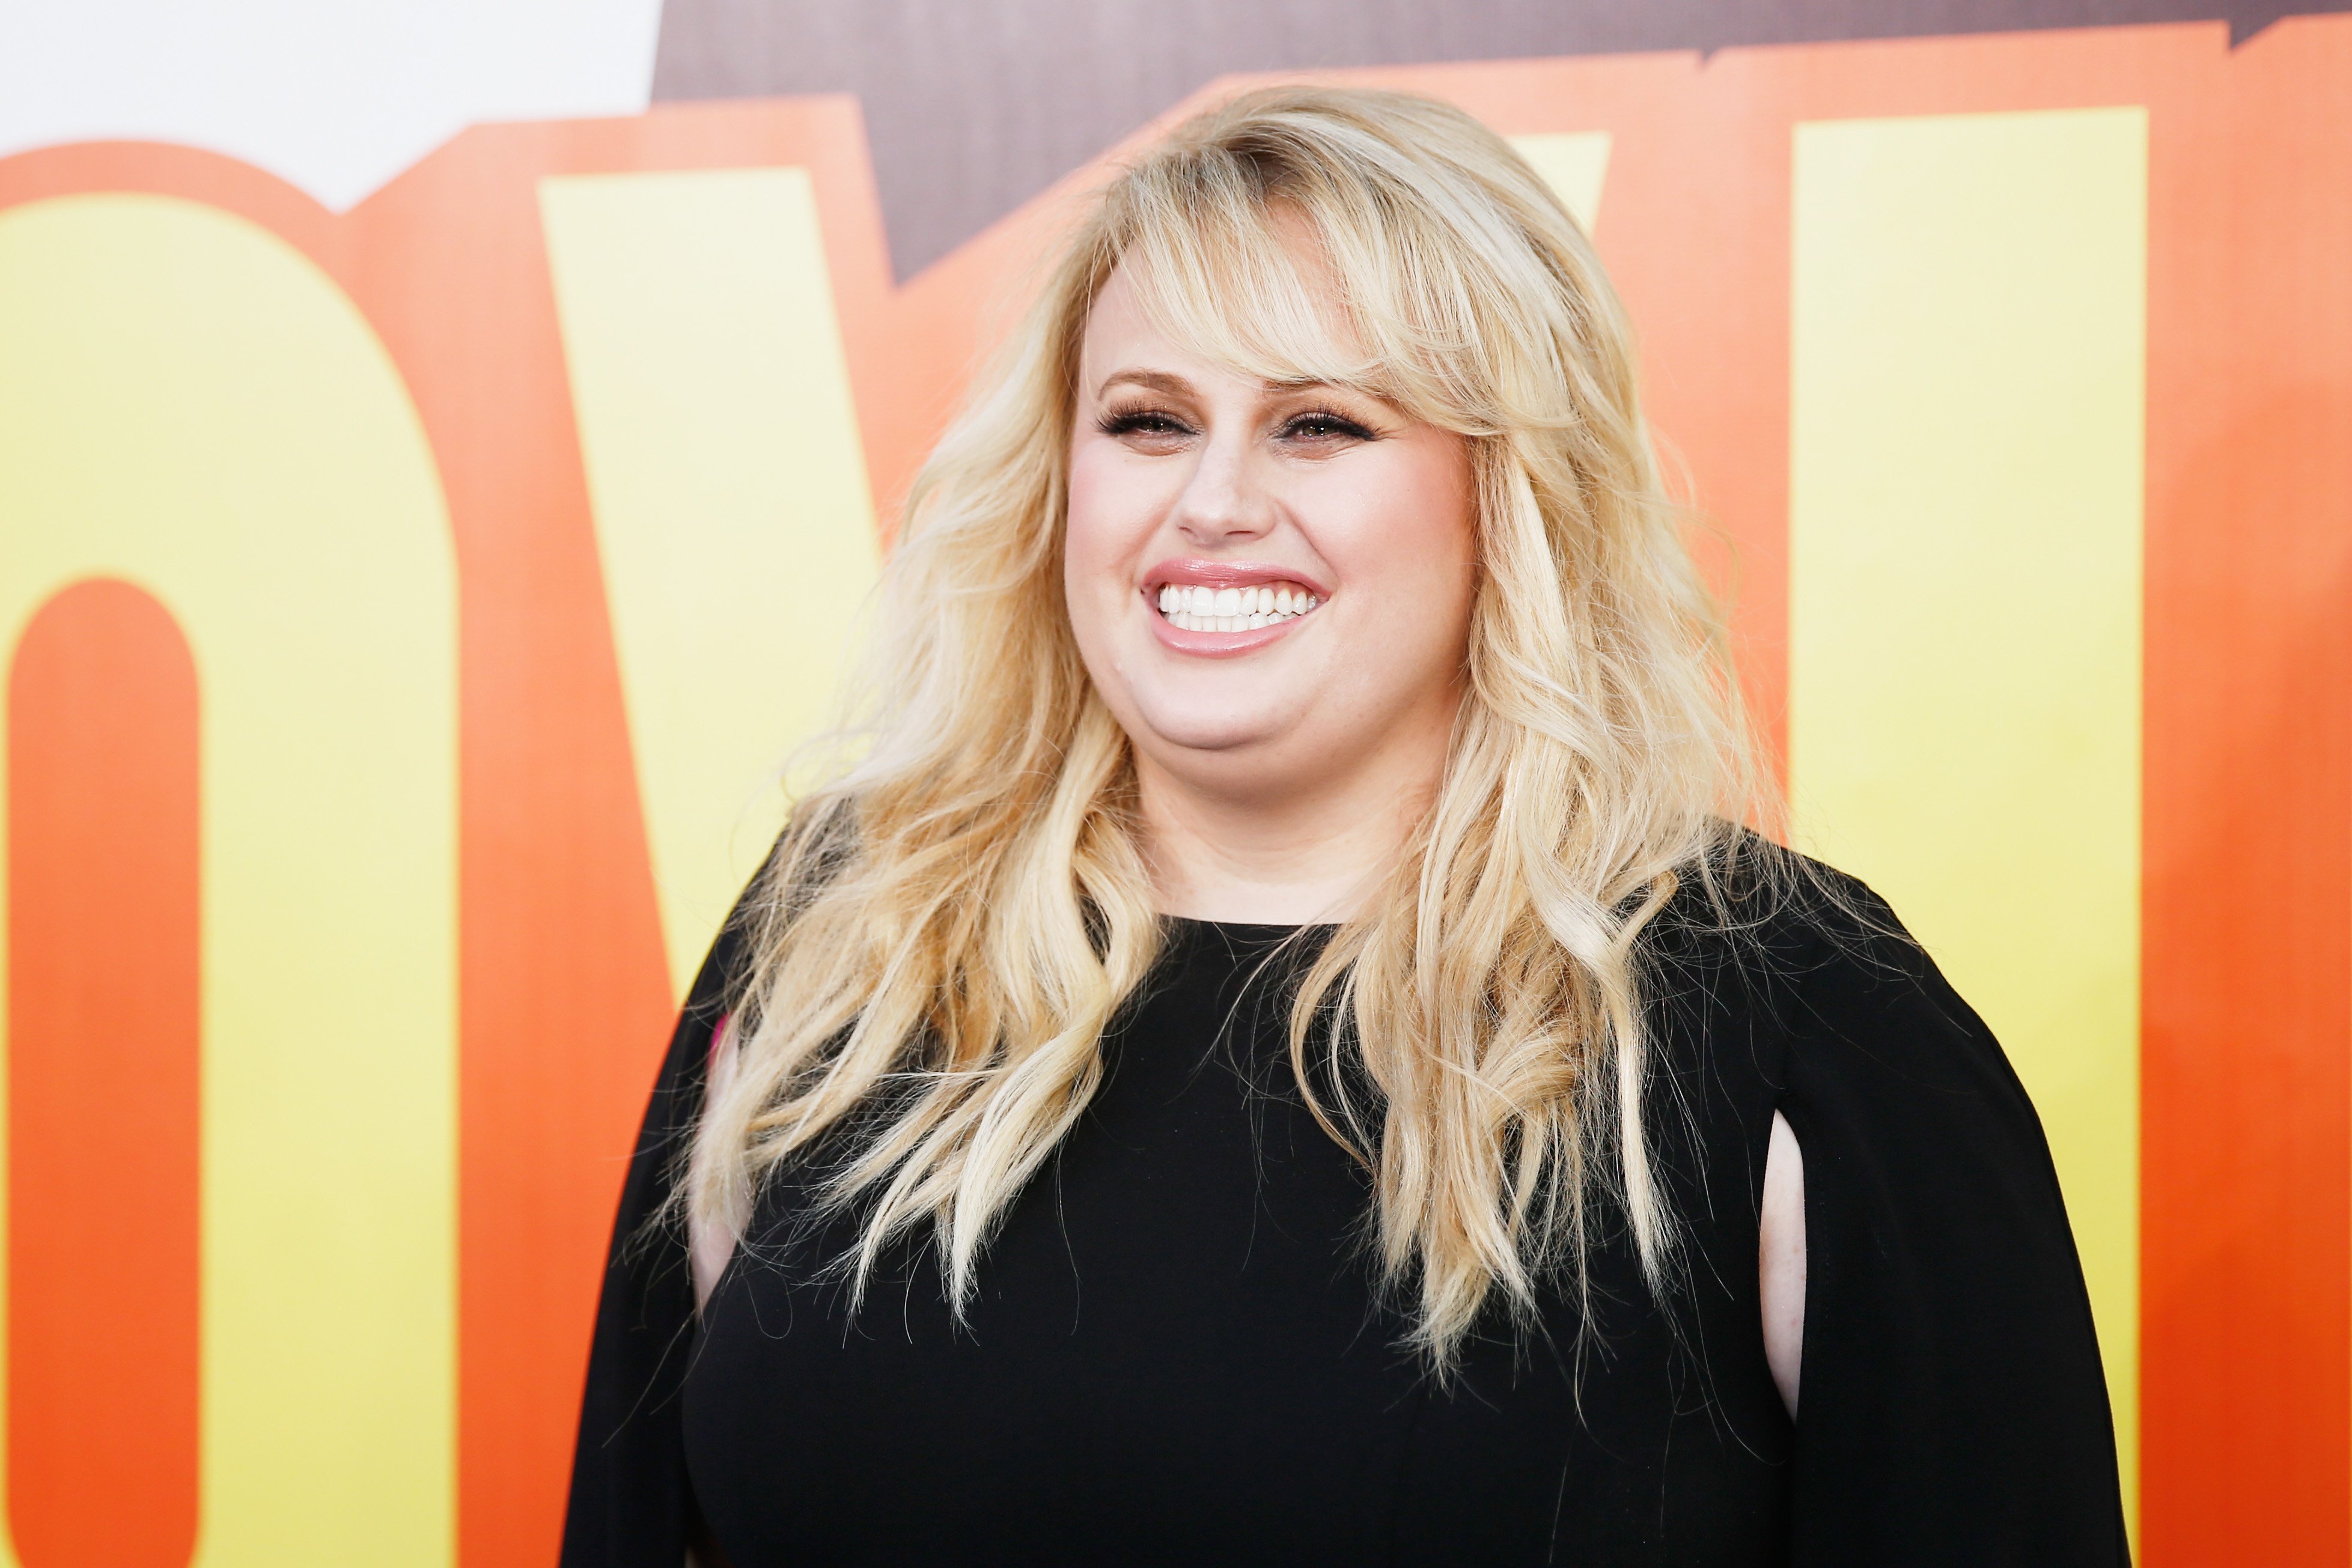 Rebel Wilson attends the 2015 MTV Movie Awards at Nokia Theatre L.A. Live on April 12, 2015 in Los Angeles, California | Photo: Getty Images